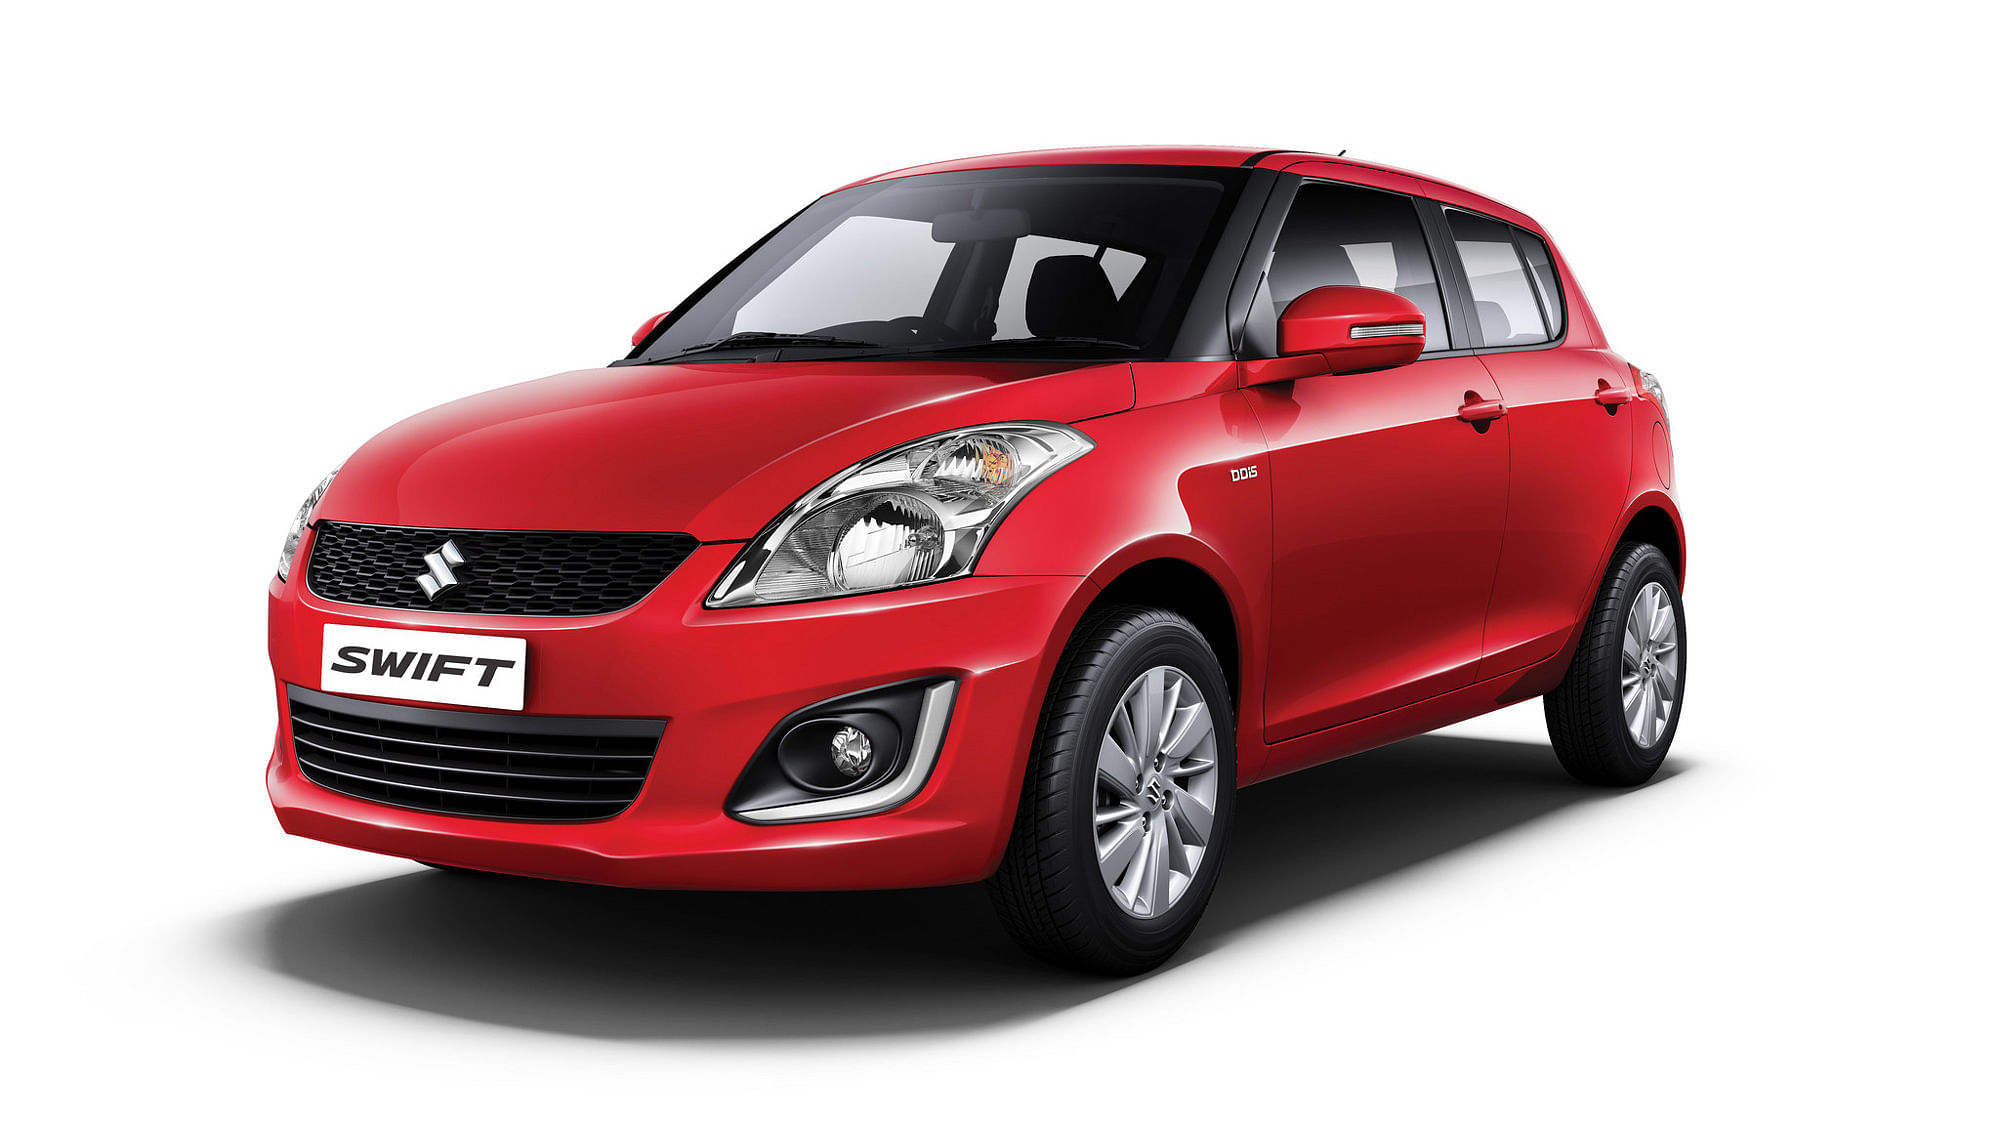 Maruti Suzuki Swift will now be available with safety features like Airbags and ABS. (Photo: Maruti Suzuki India)